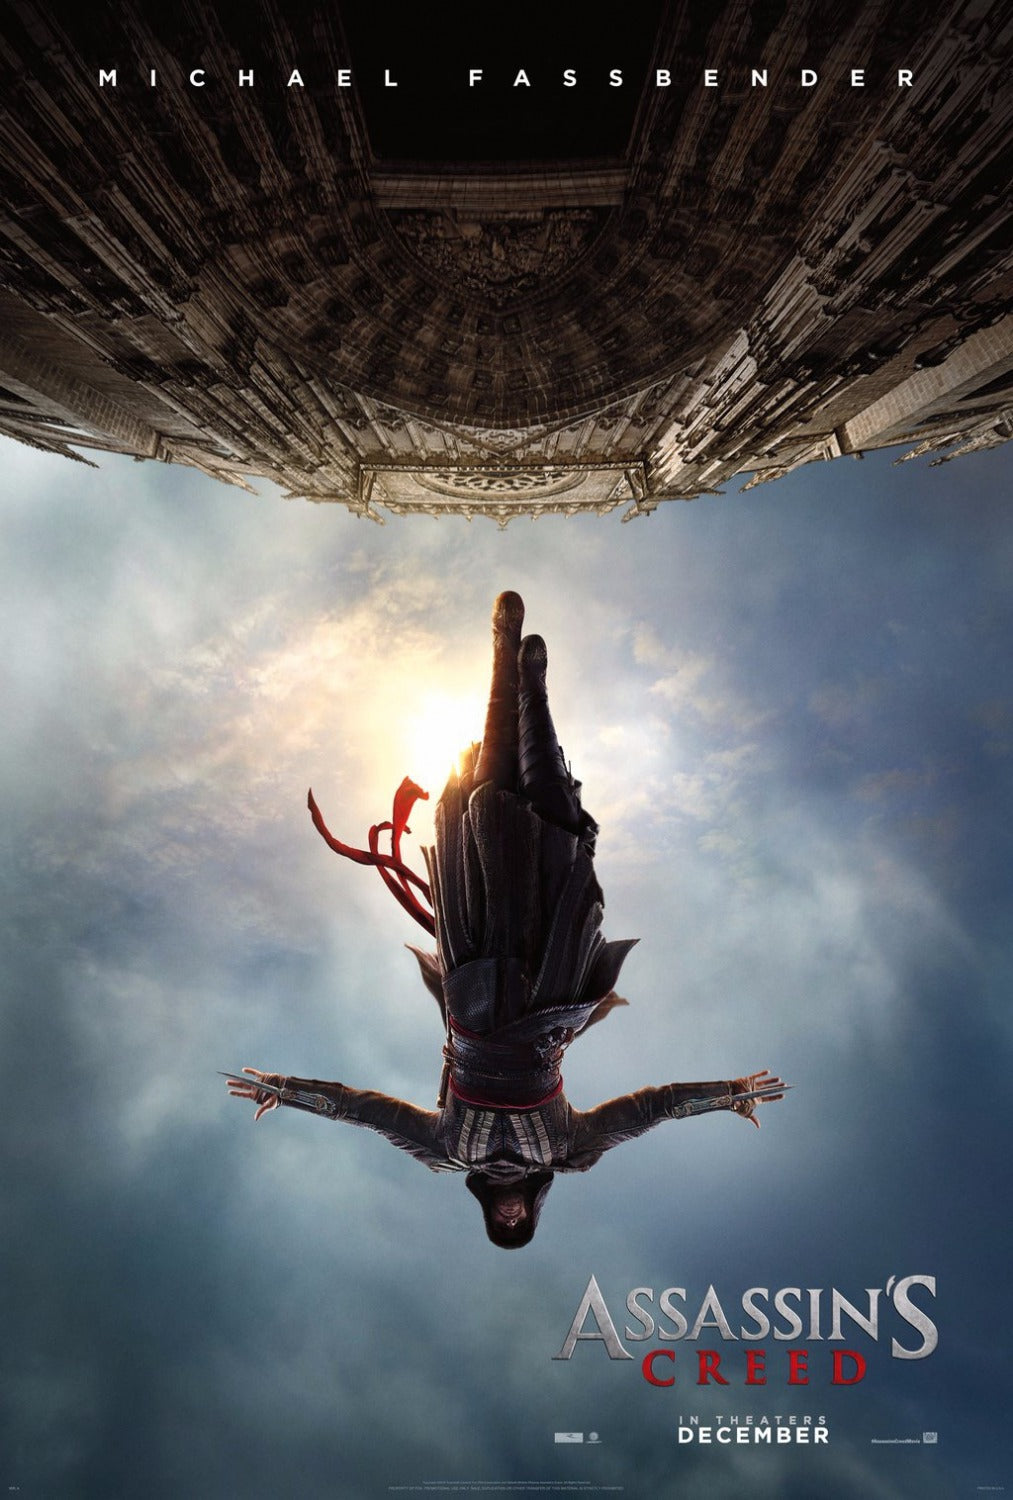 Poster Pelicula Assassin's Creed